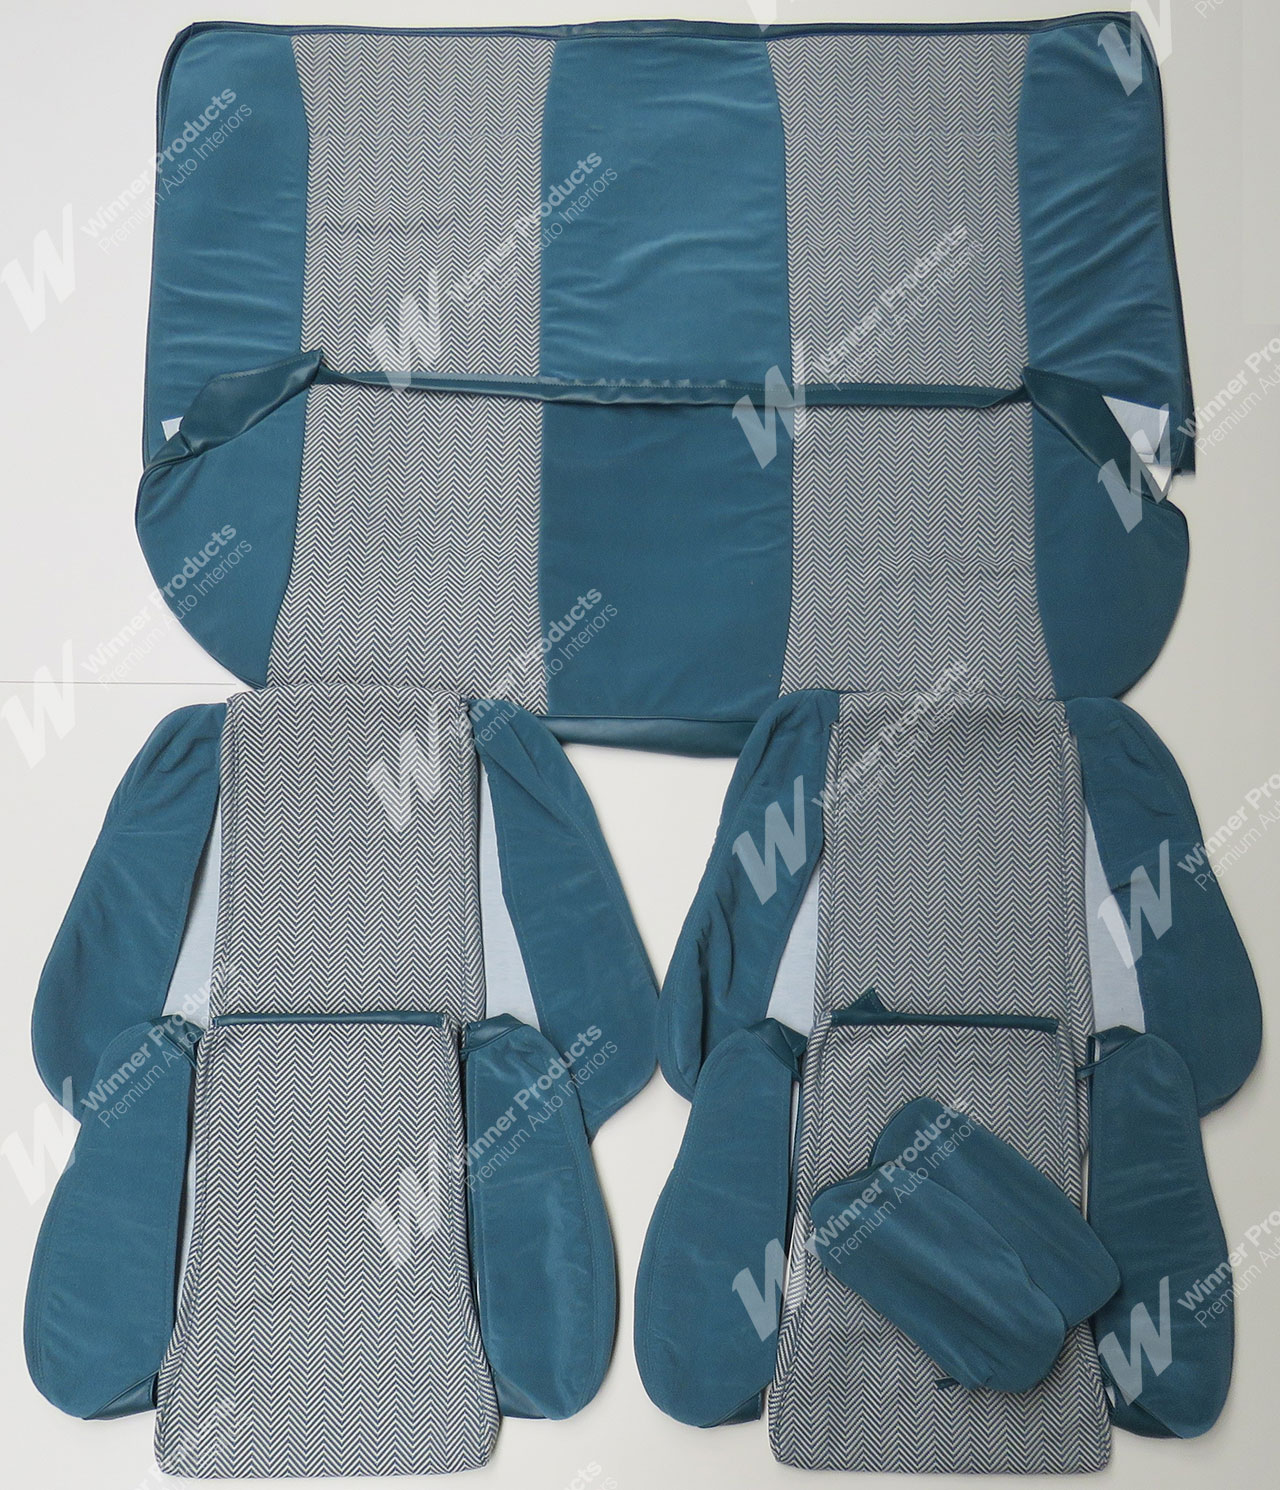 Holden Commodore VK SS Sedan 23X Cerulean Seat Covers (Image 1 of 8)